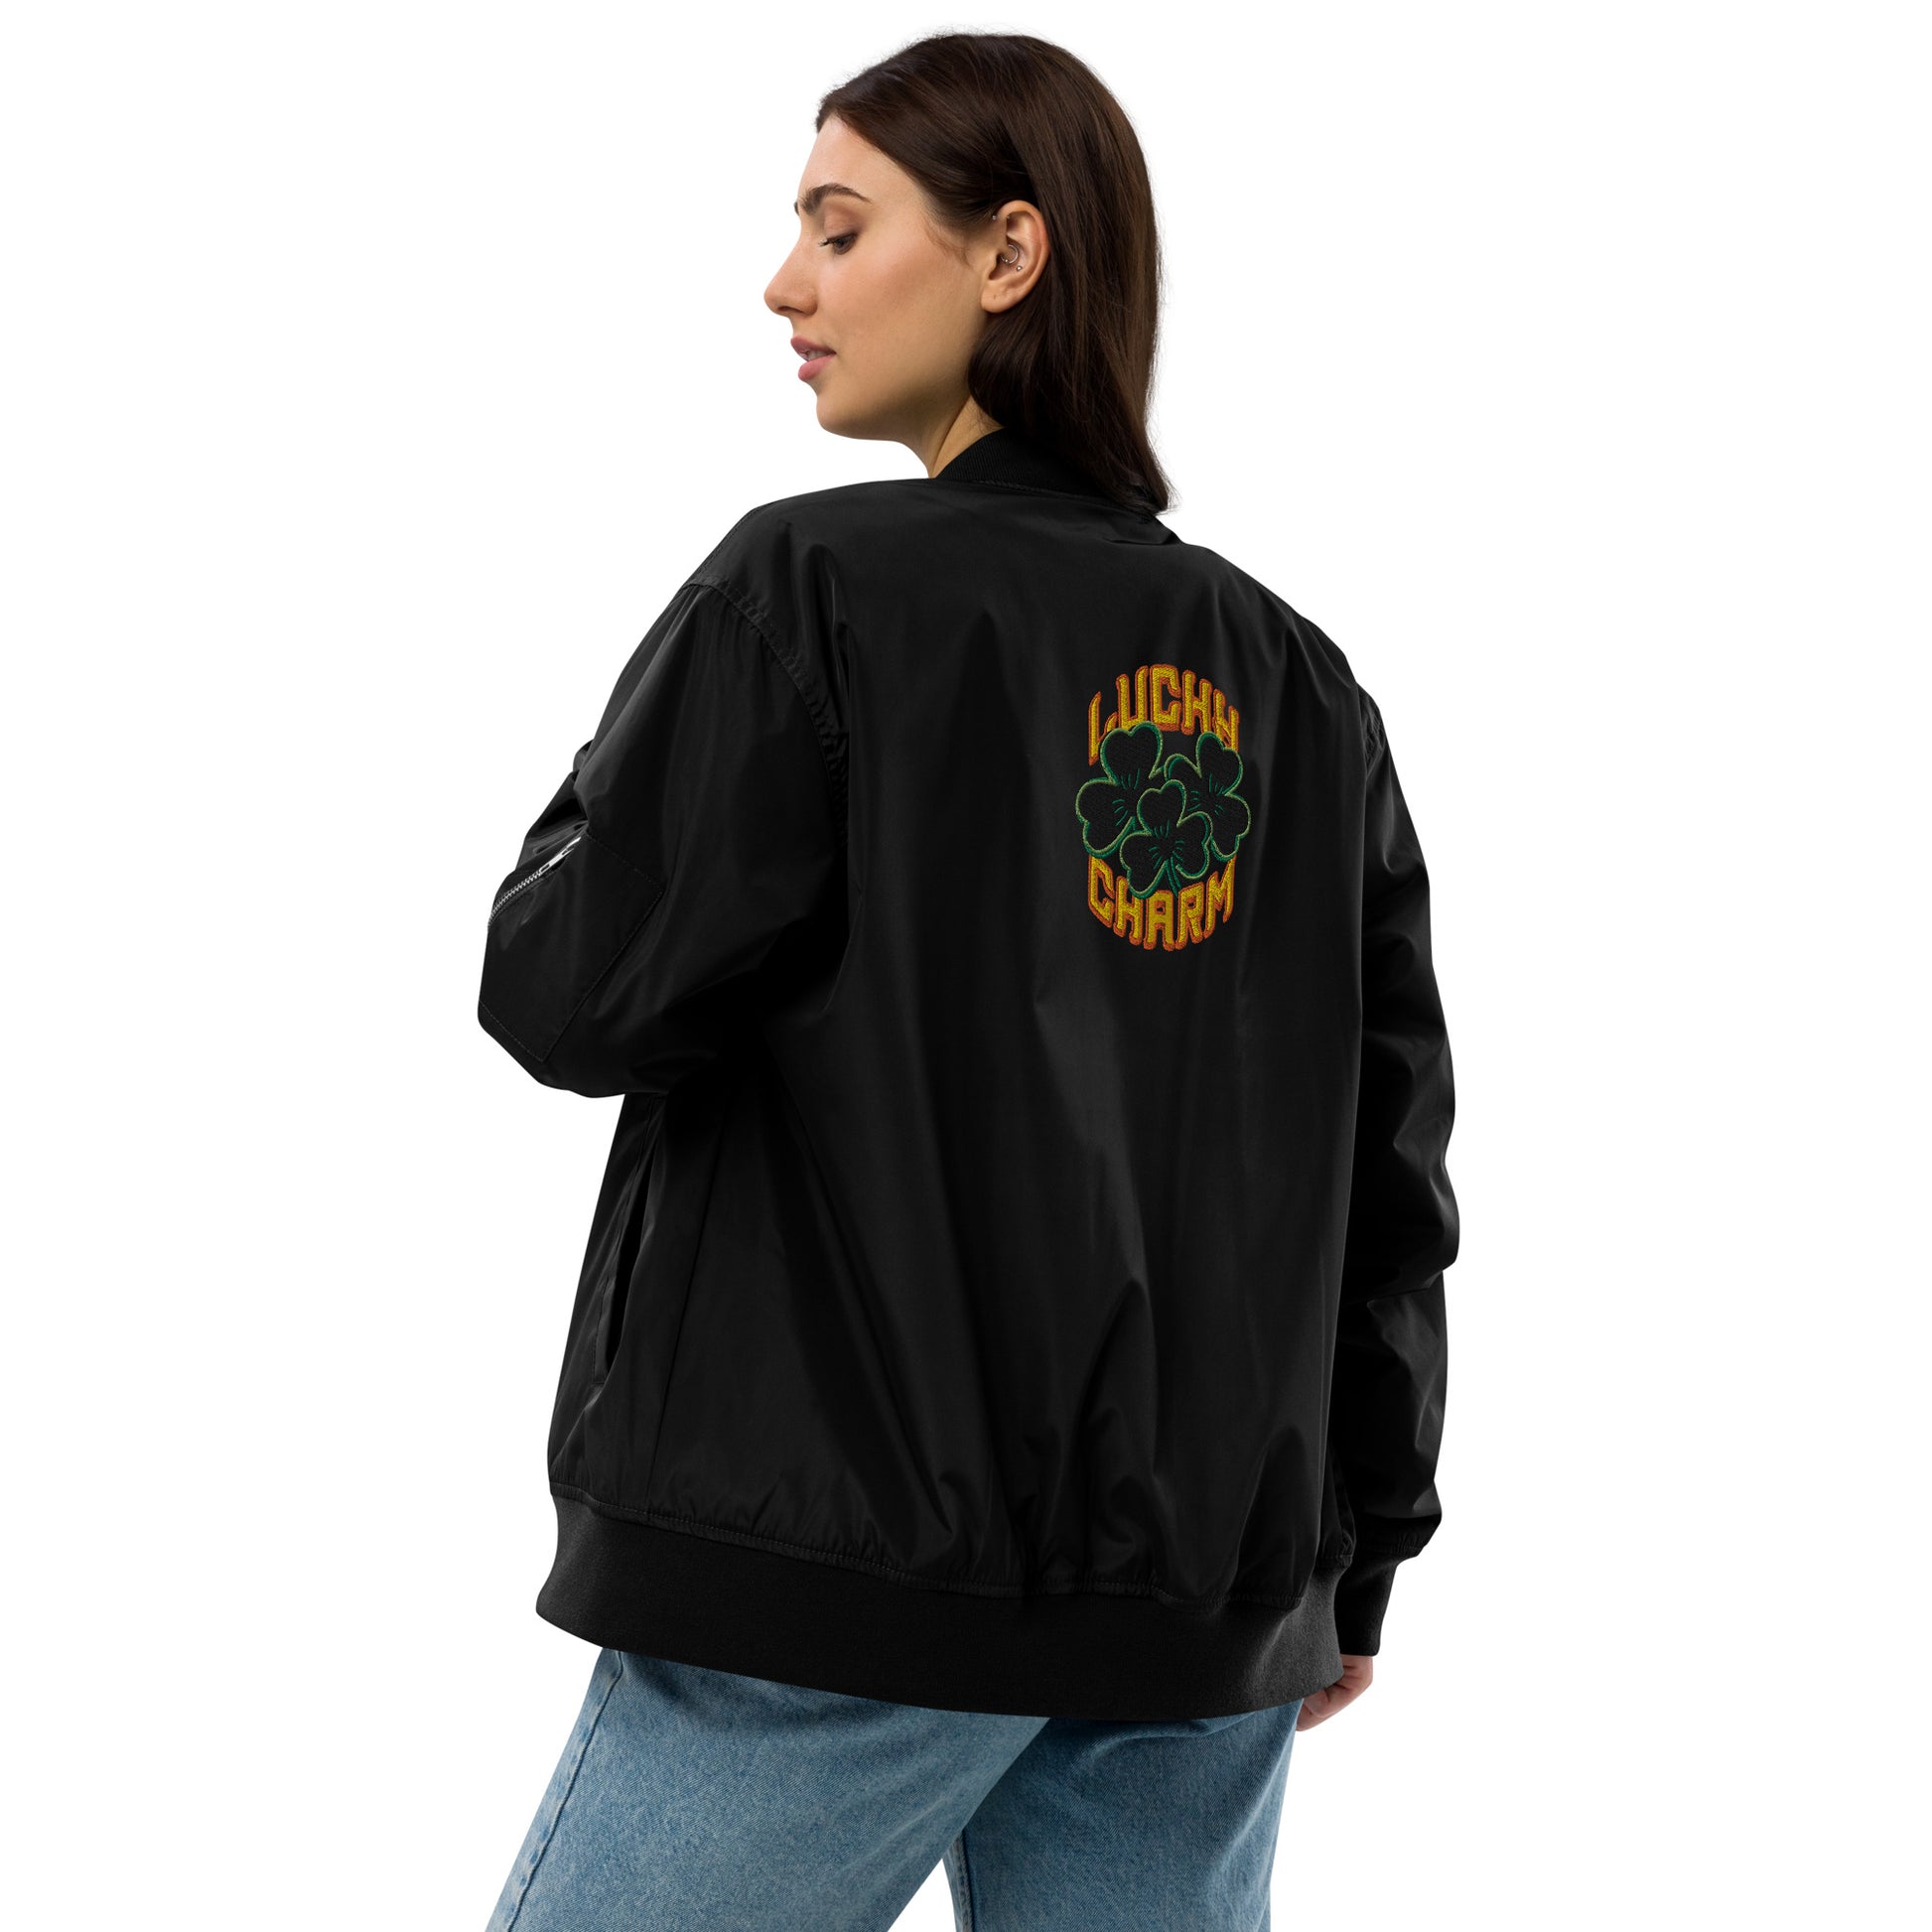 Lucky Charm Bomber Jacket - Enoch Lab